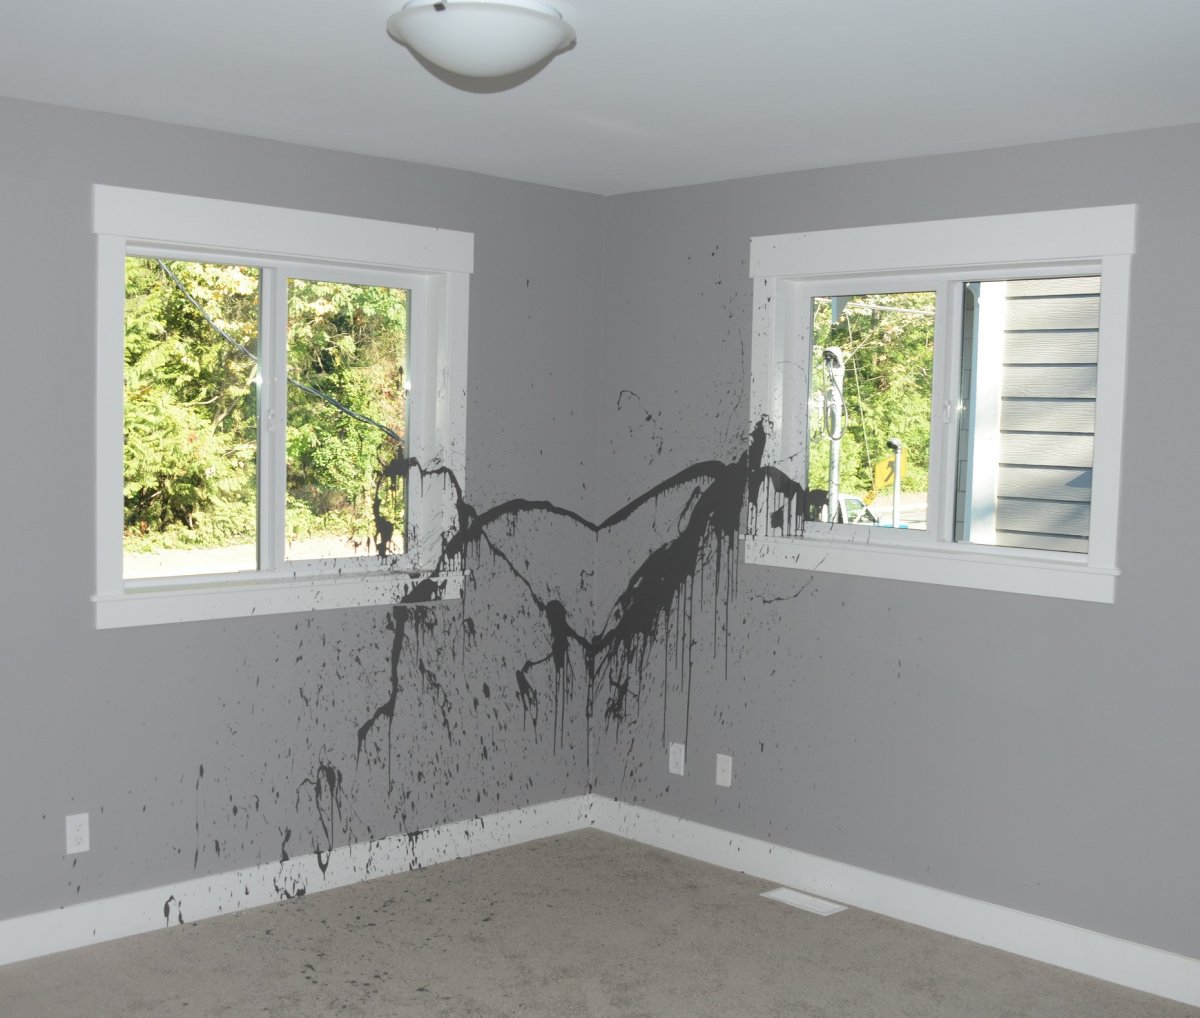 North Vancouver RCMP officers are looking for who is responsible for pouring out paint in a new home.